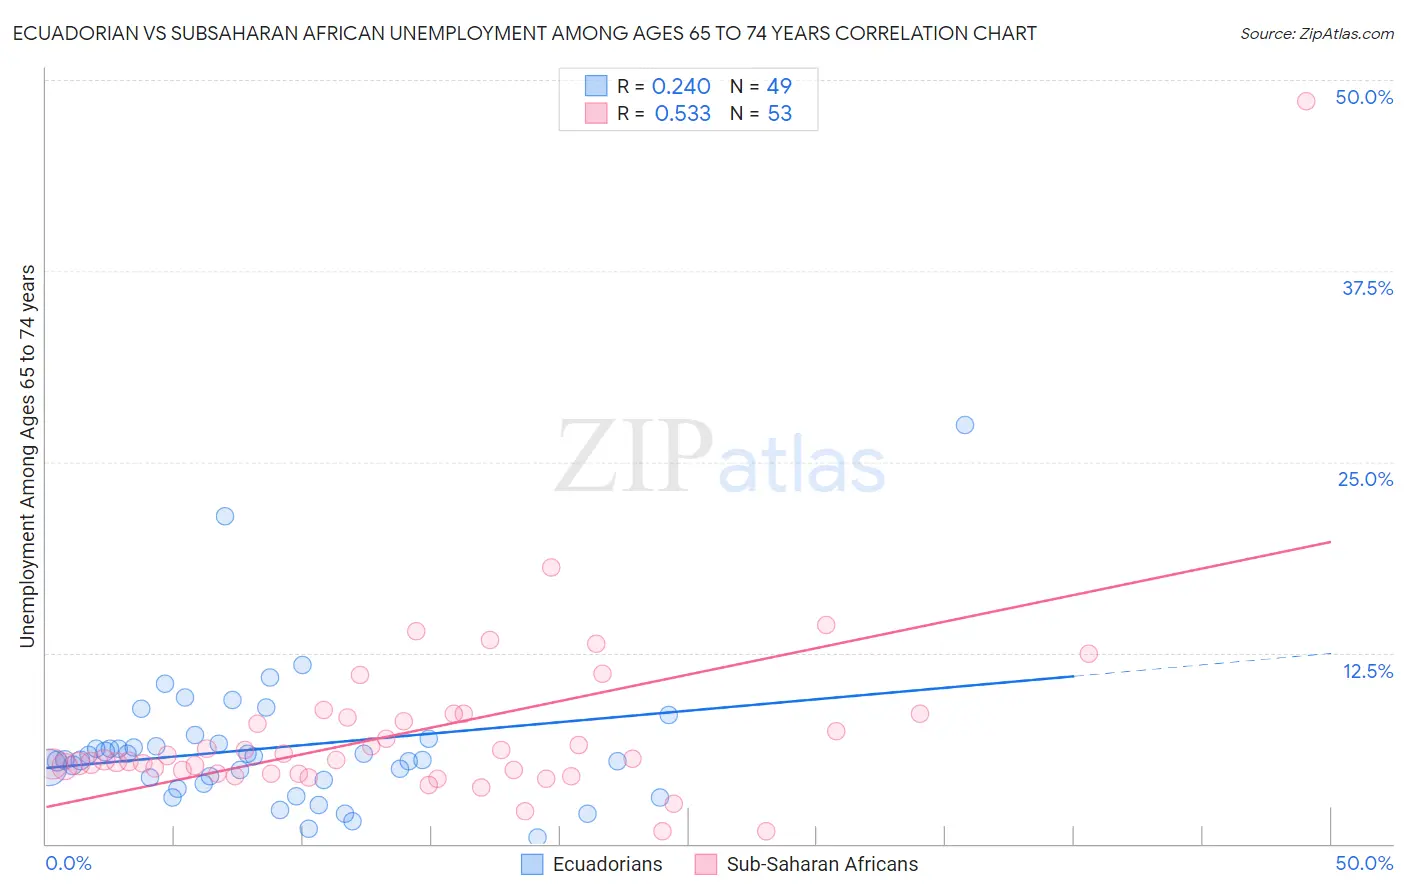 Ecuadorian vs Subsaharan African Unemployment Among Ages 65 to 74 years